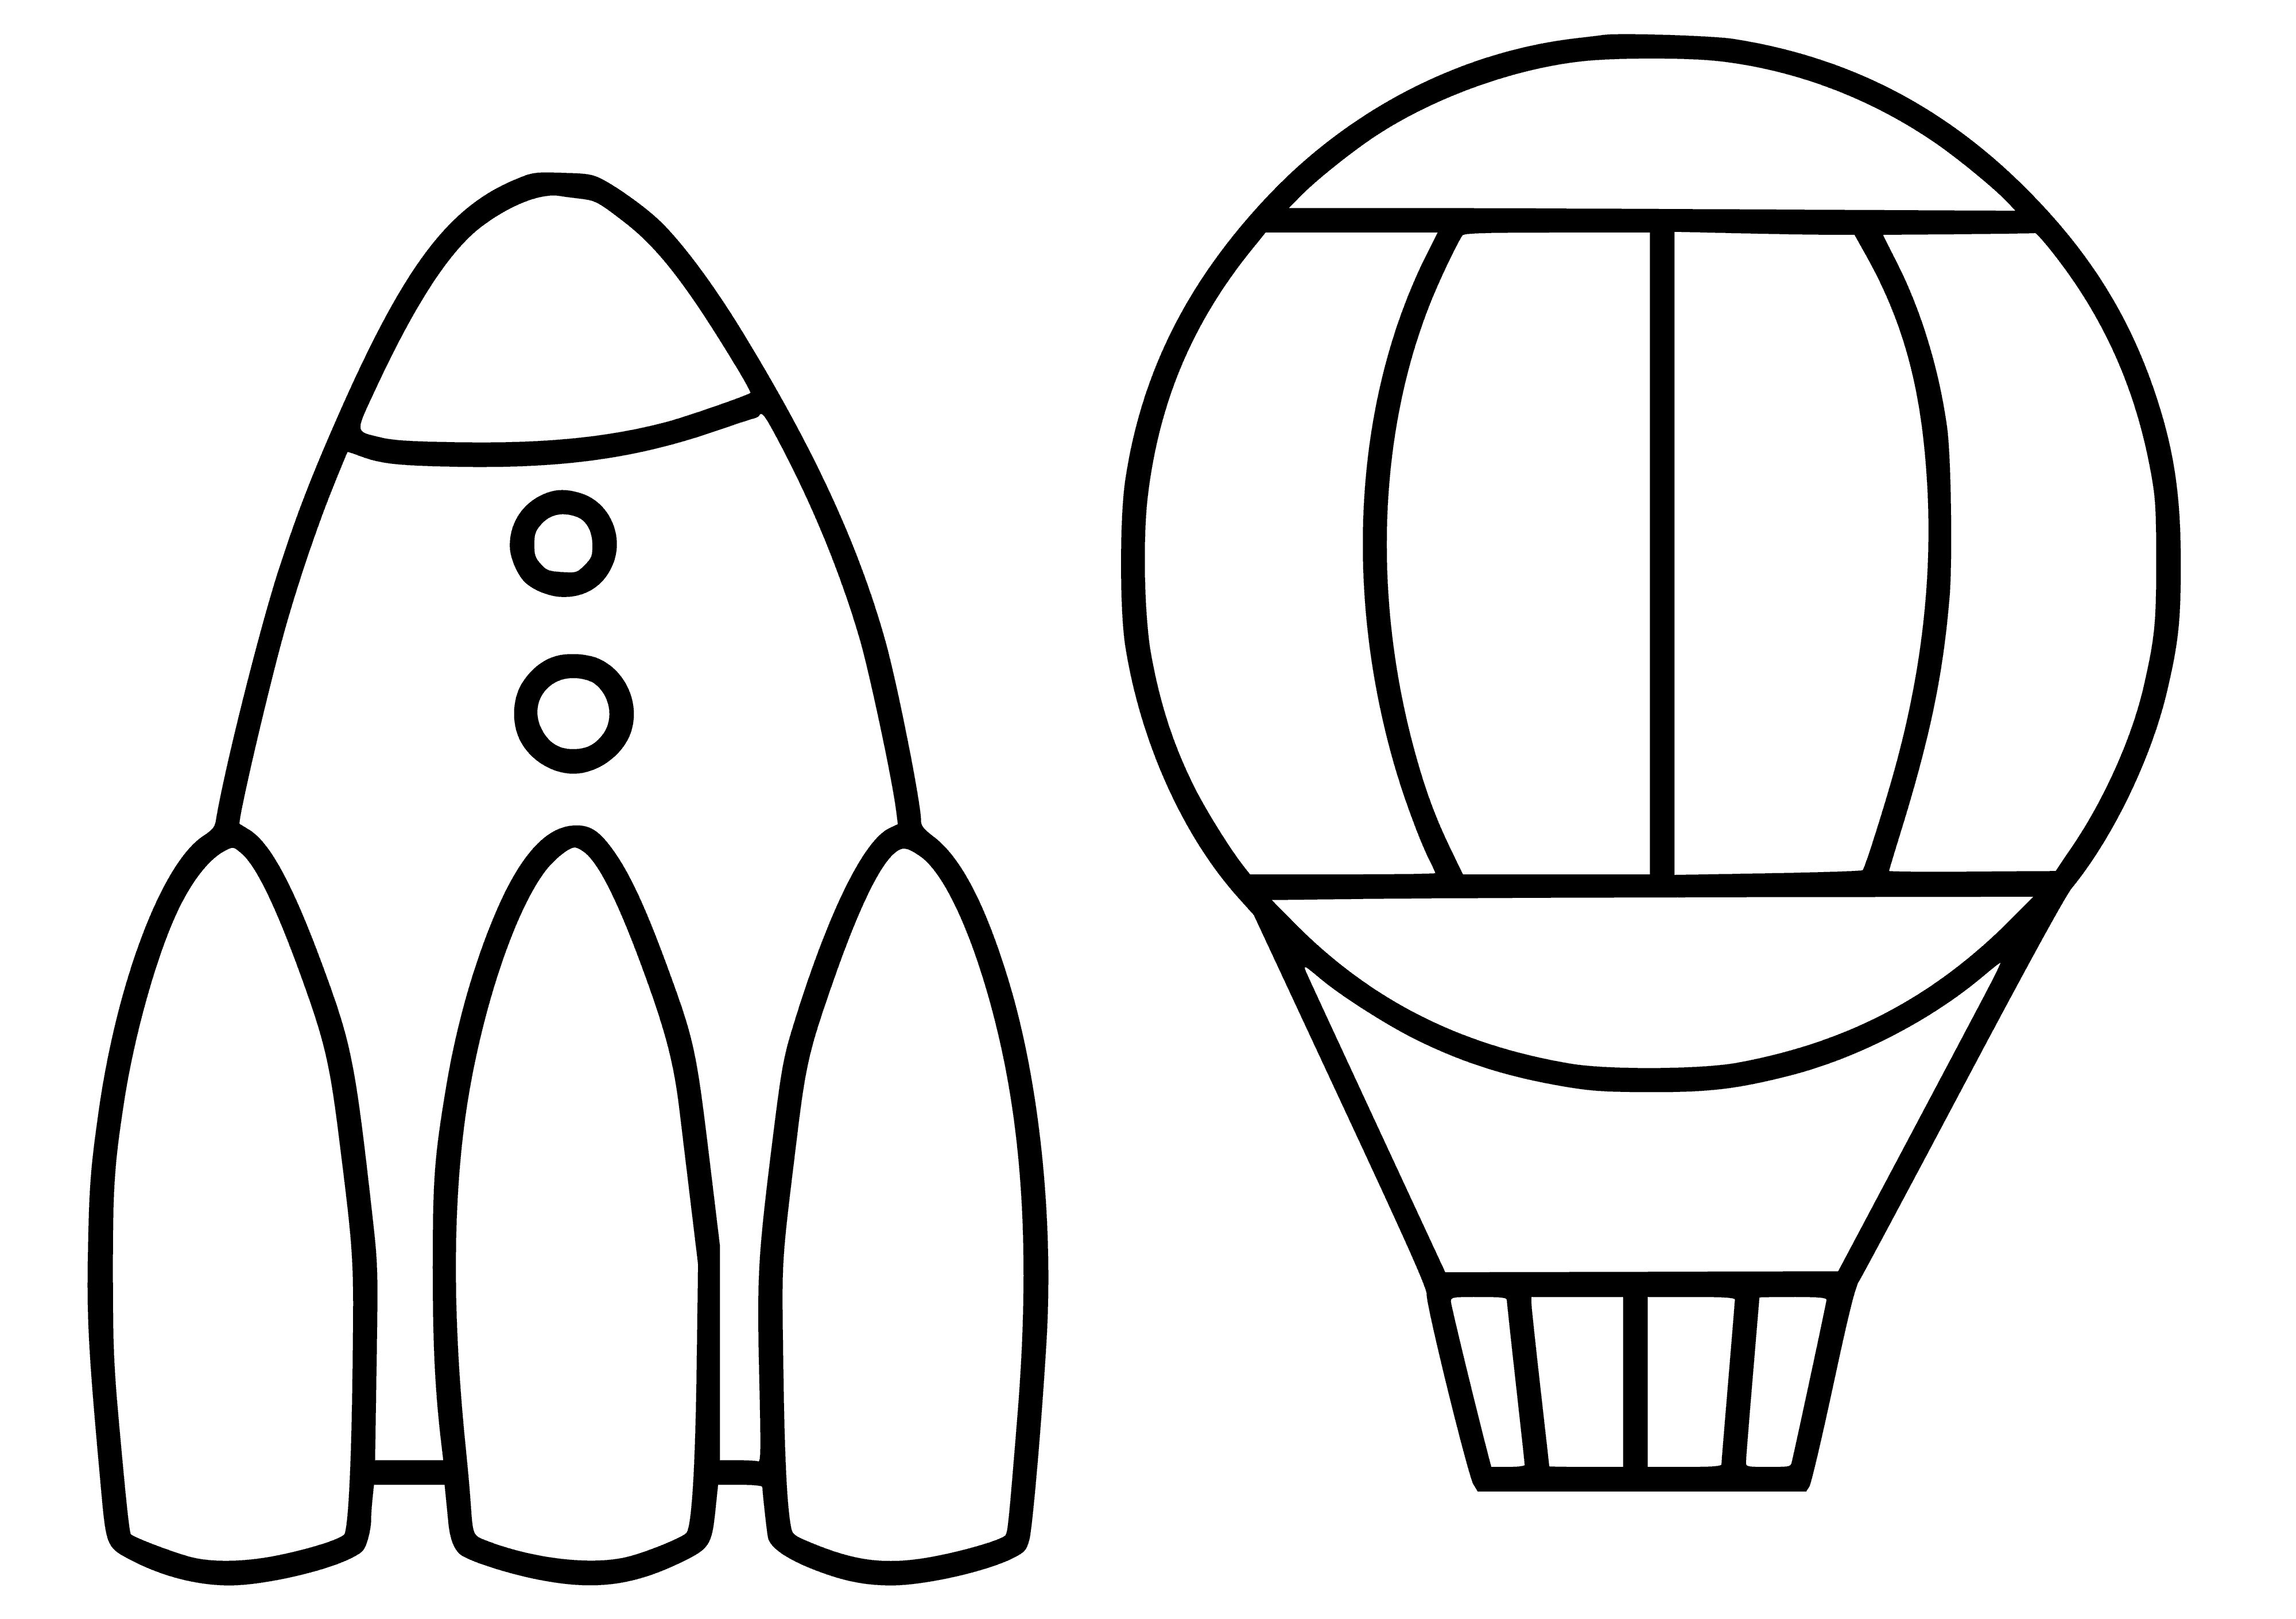 coloring page: A big green rocket and bright red ball float side-by-side in simple coloring pages. #Coloring #rocket #ball